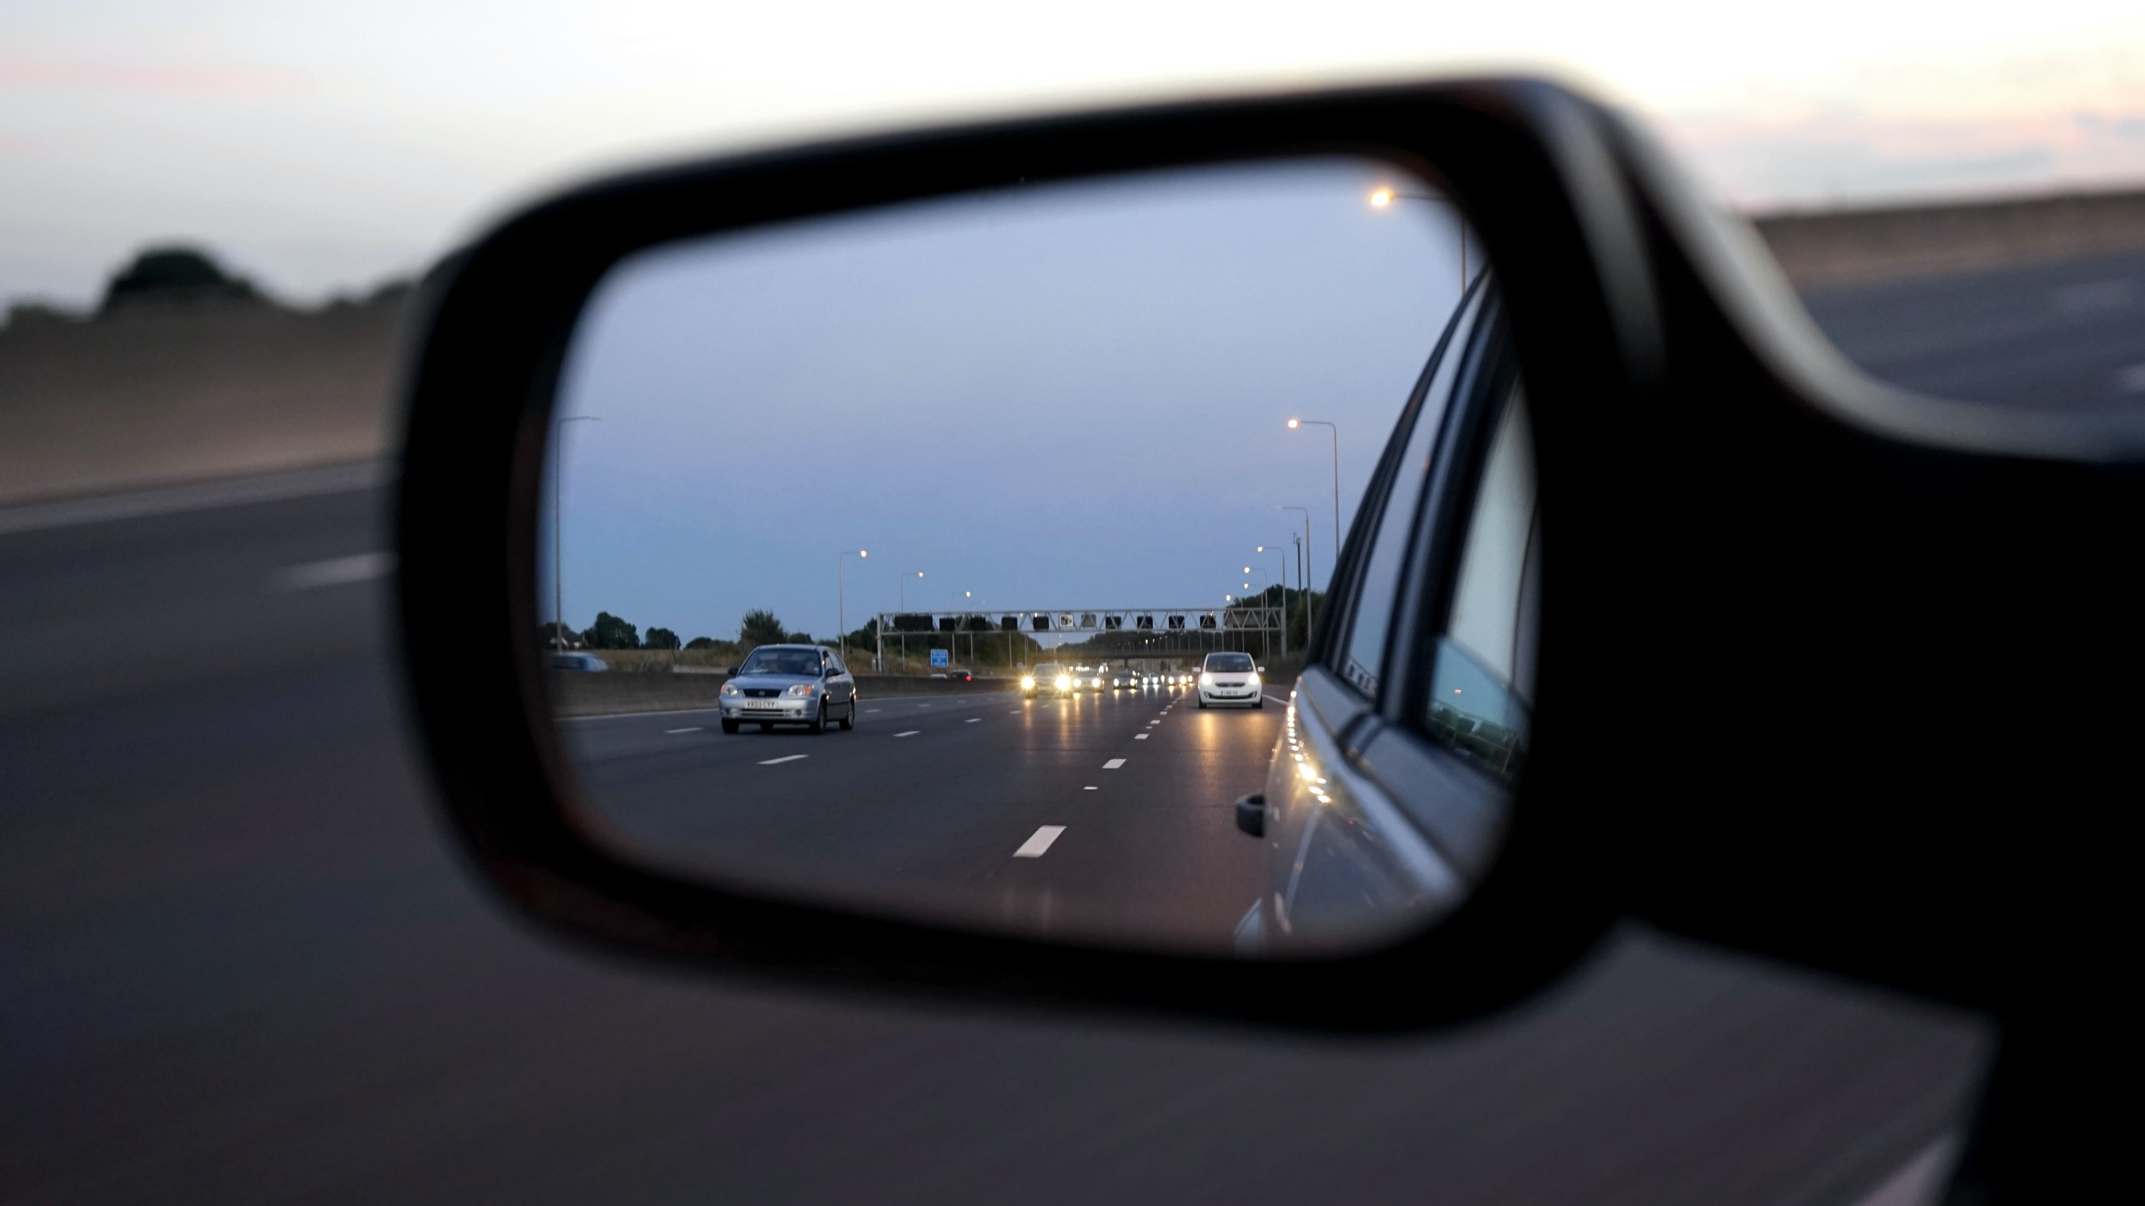 Side view mirror on a car.